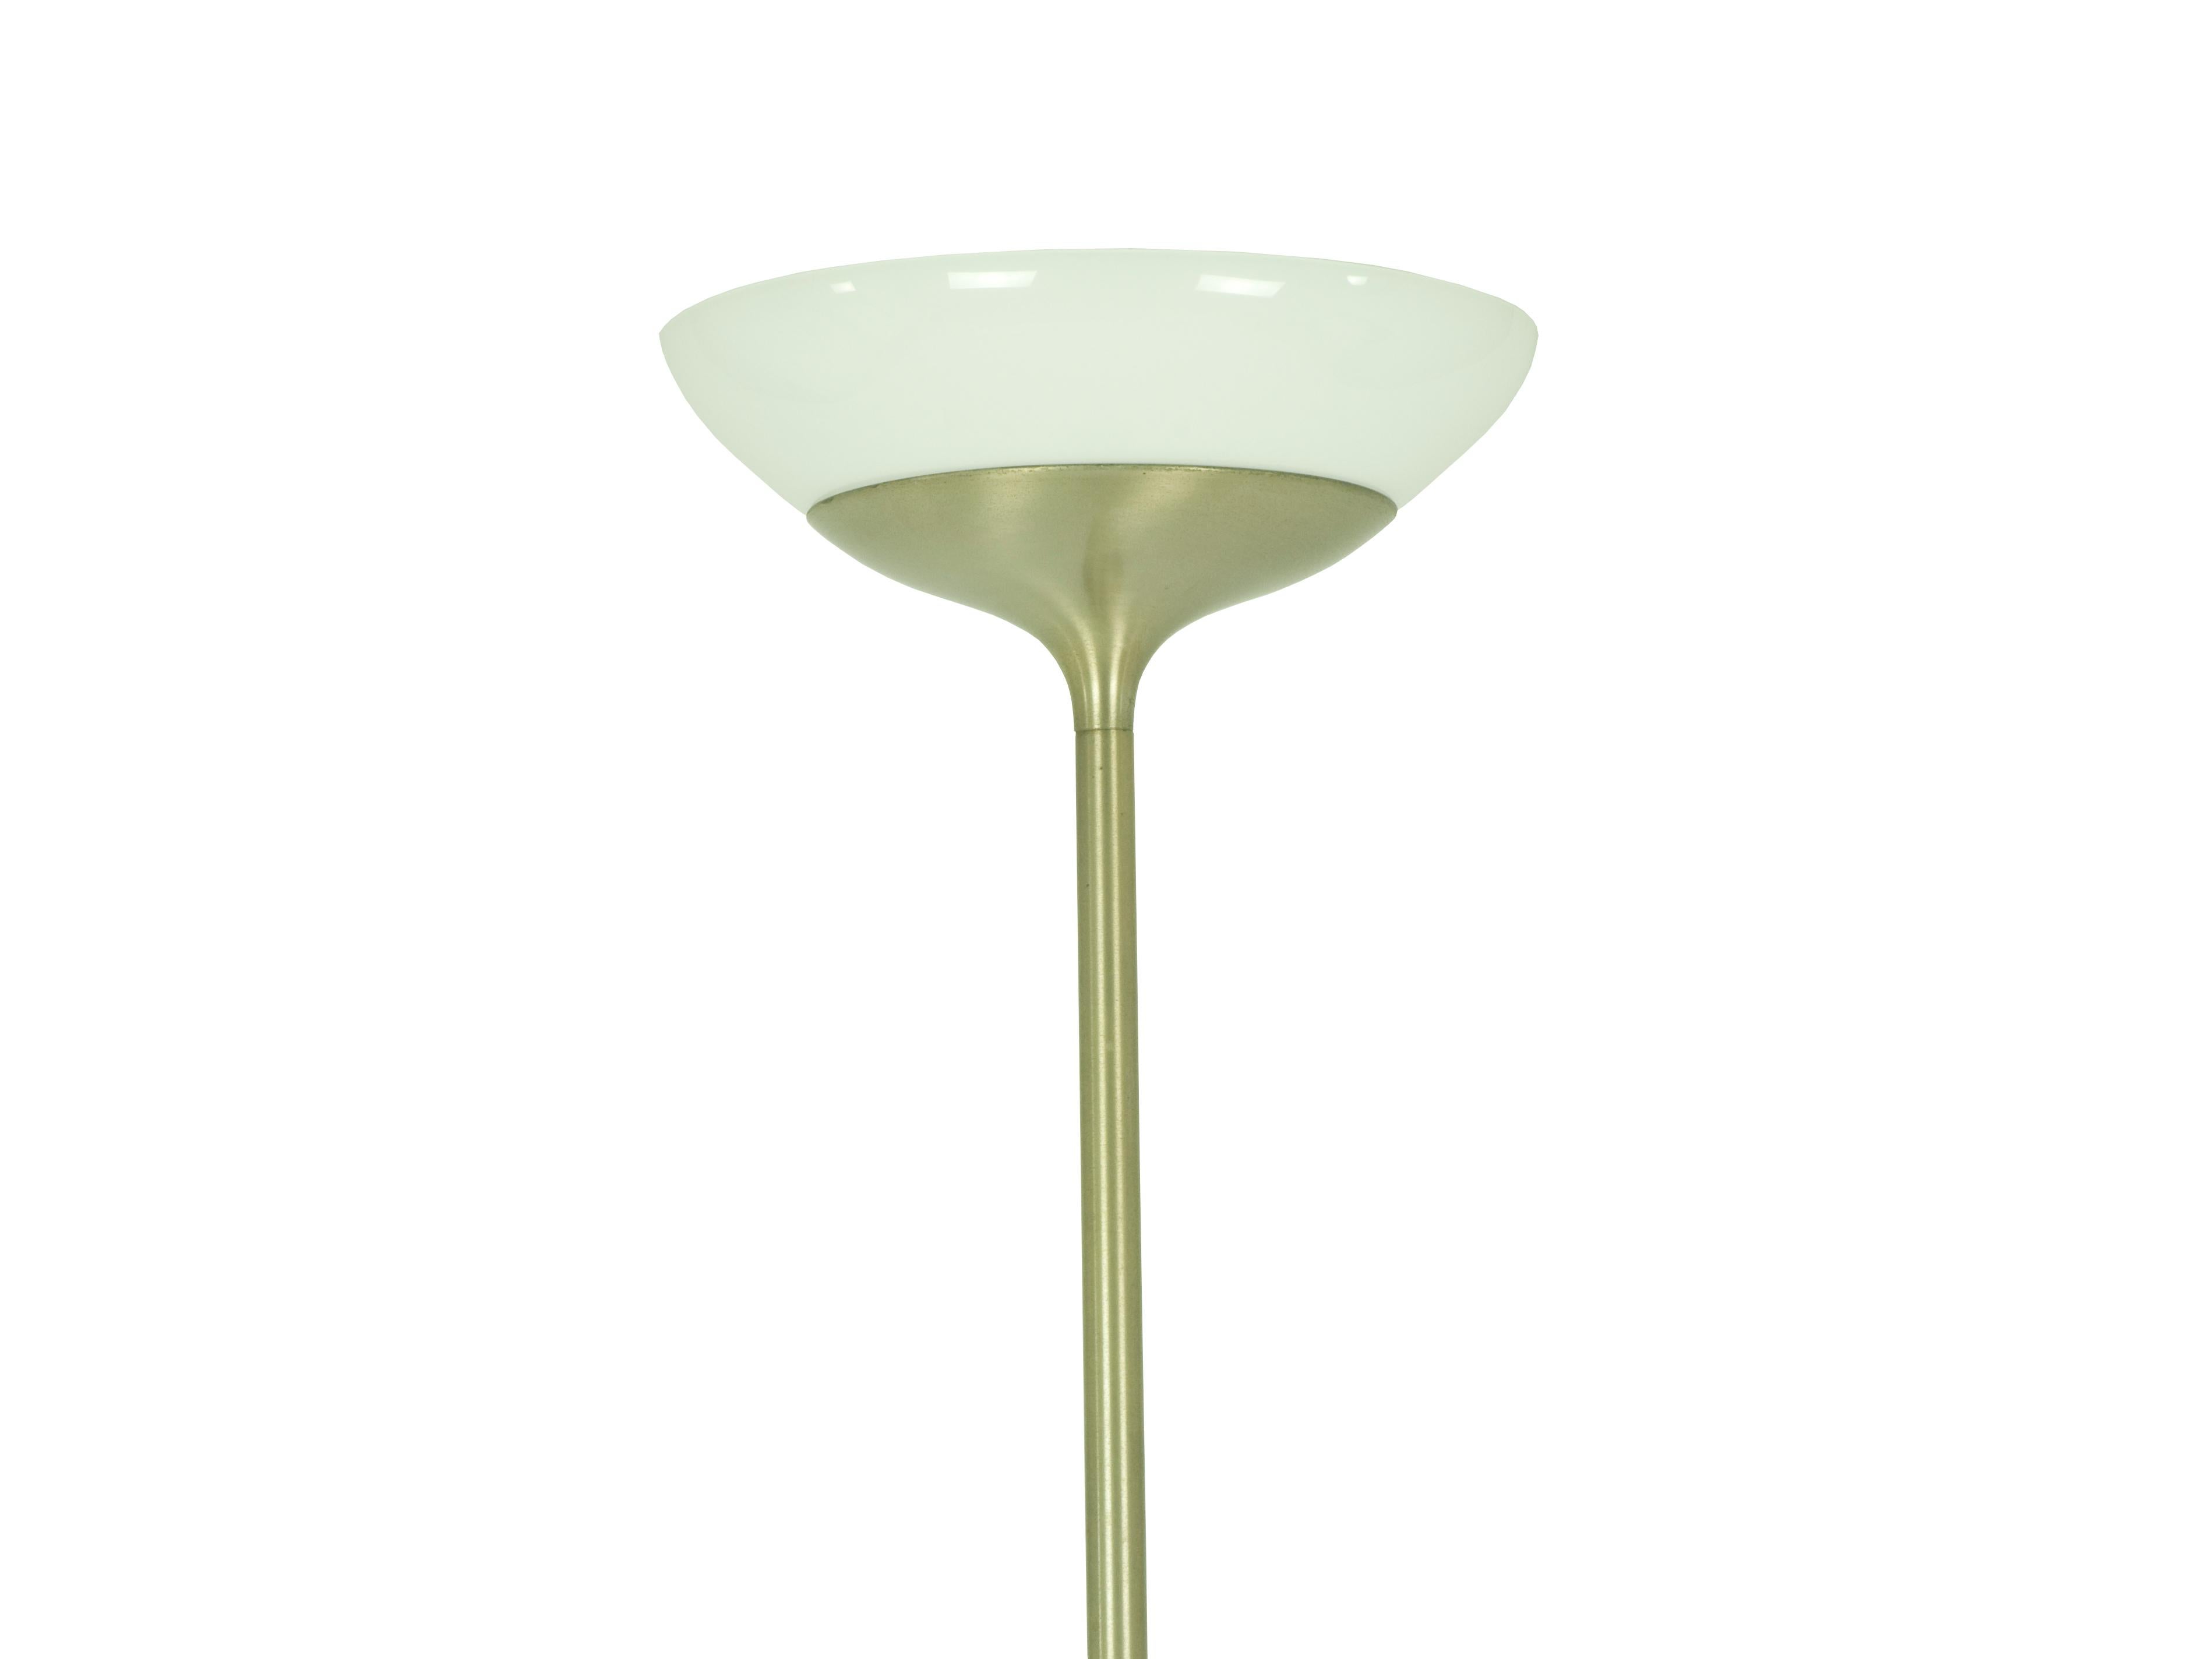 An iconic Aminta floor lamp designed by Emma Gismondi Schweinberger for Artemide. The lamp is made from nickel-plated brass and opaline glass shade. It remains in a very good vintage condition: Patina and wear consistent with age and use. It